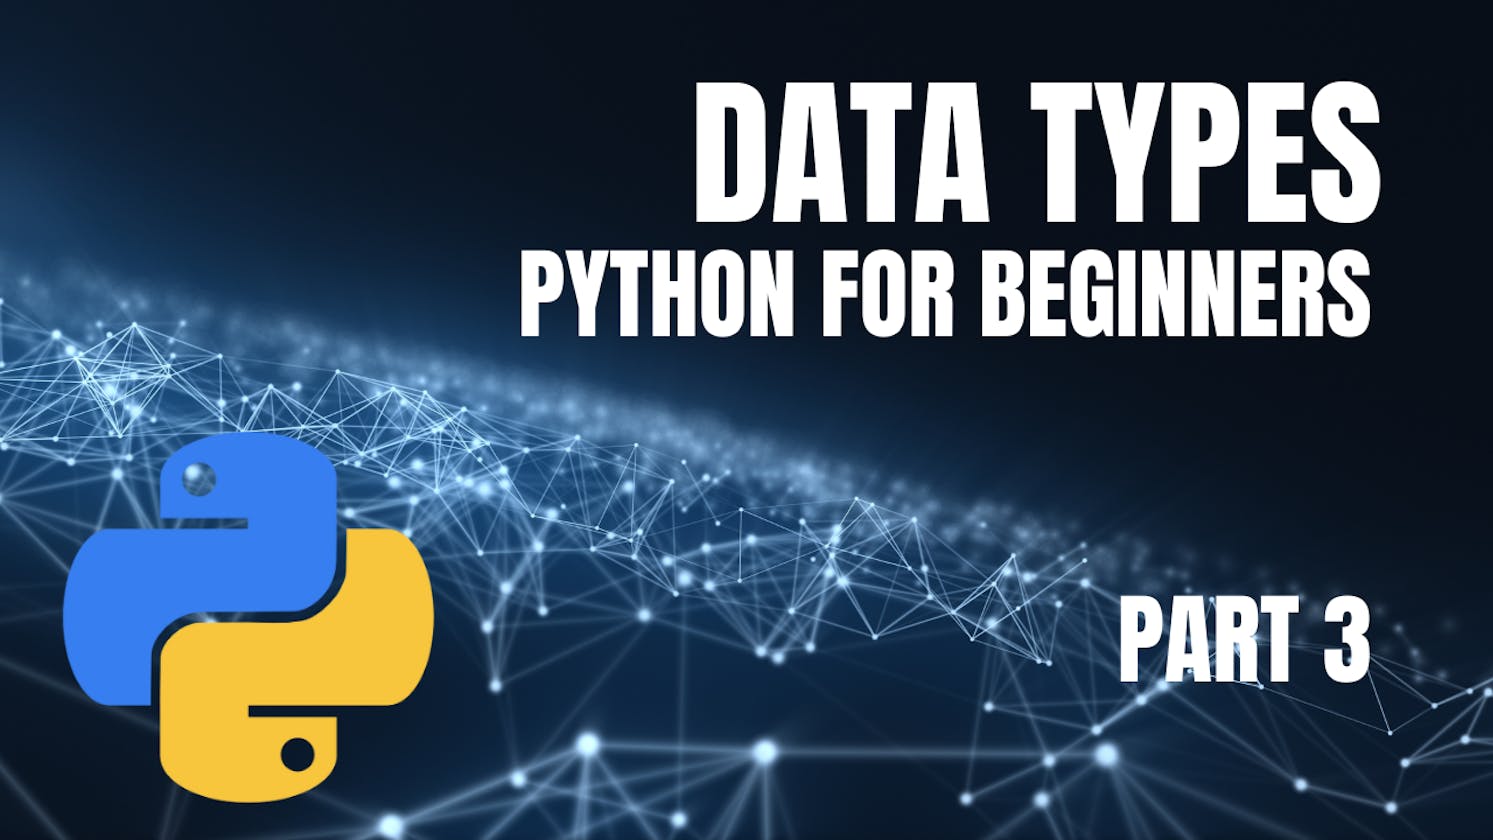 Python for Beginners: Part 3 - Exploring Data Types